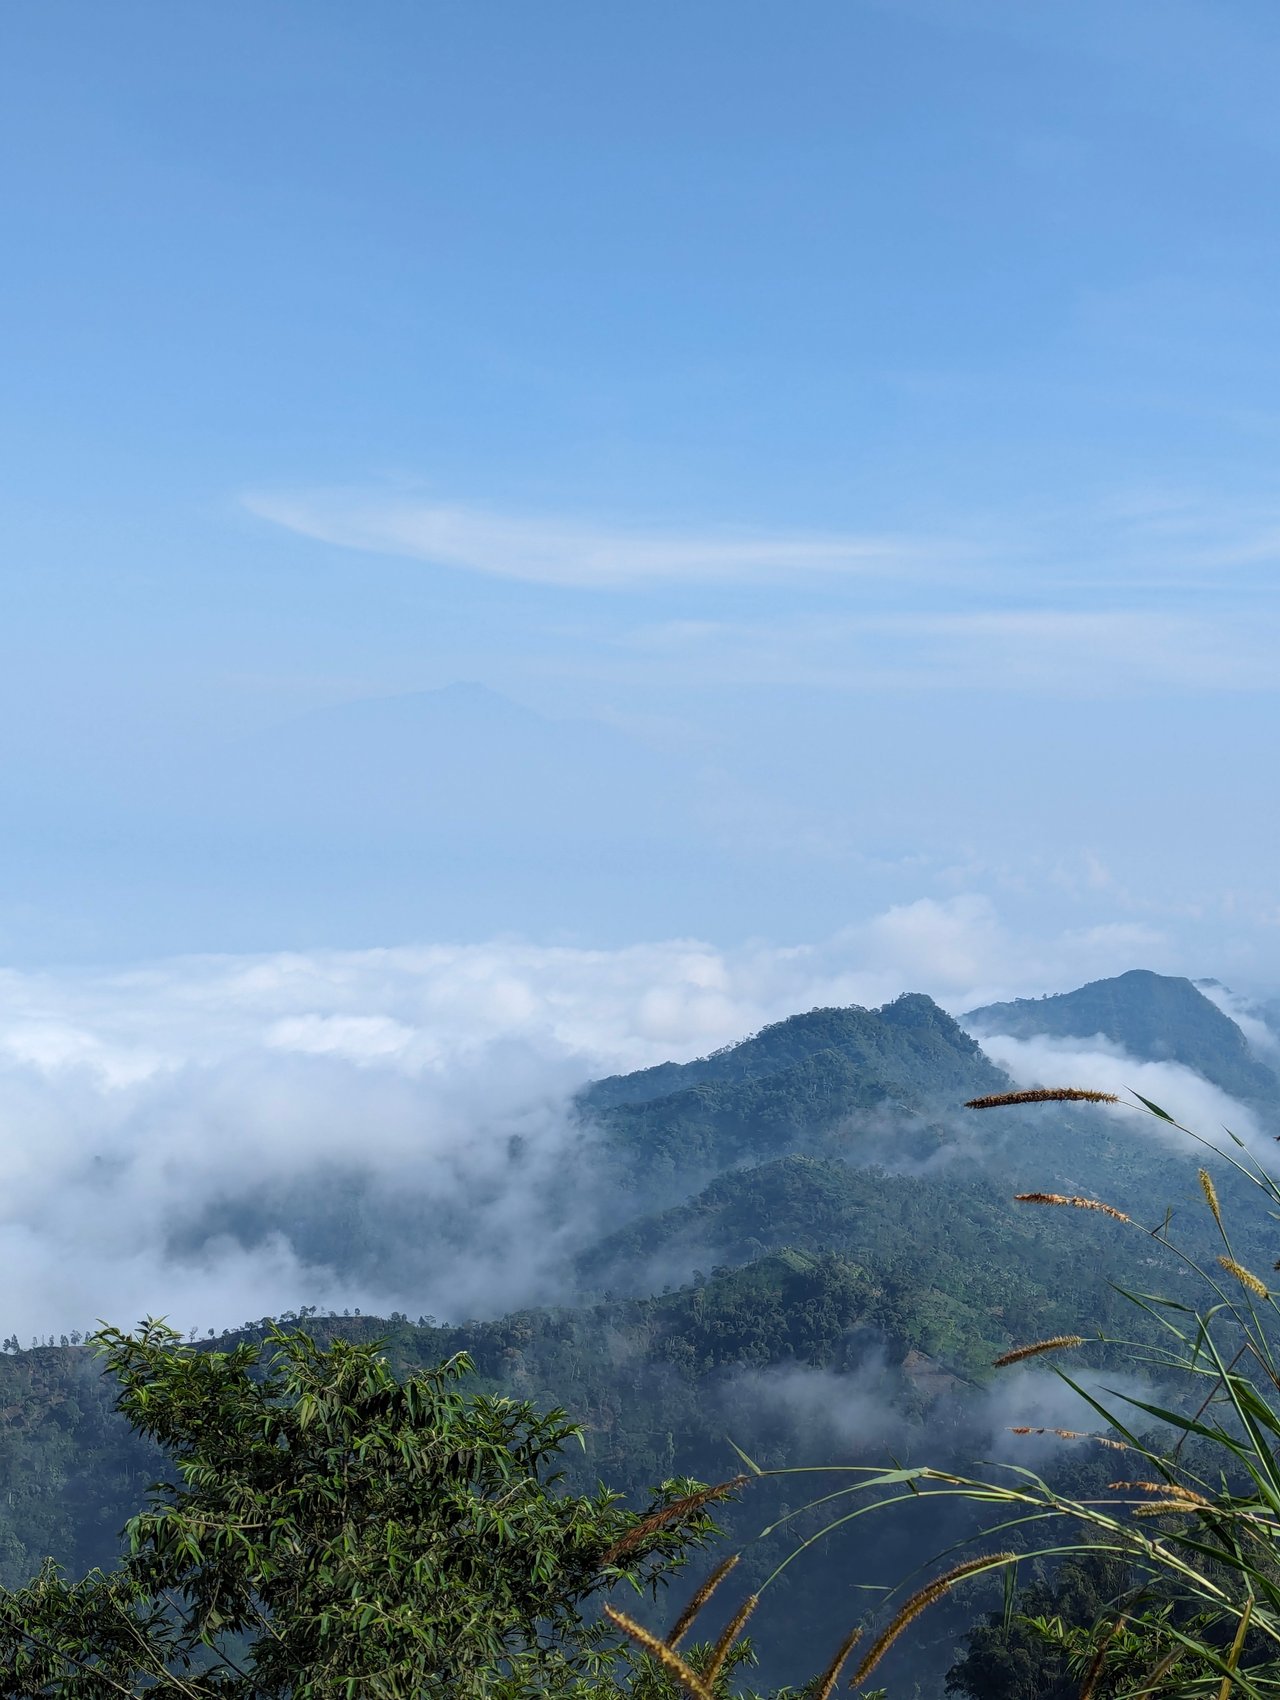 Camping at the Summit of Mount Tanggung: An Adventure to Enjoy the Beauty of Sunrise